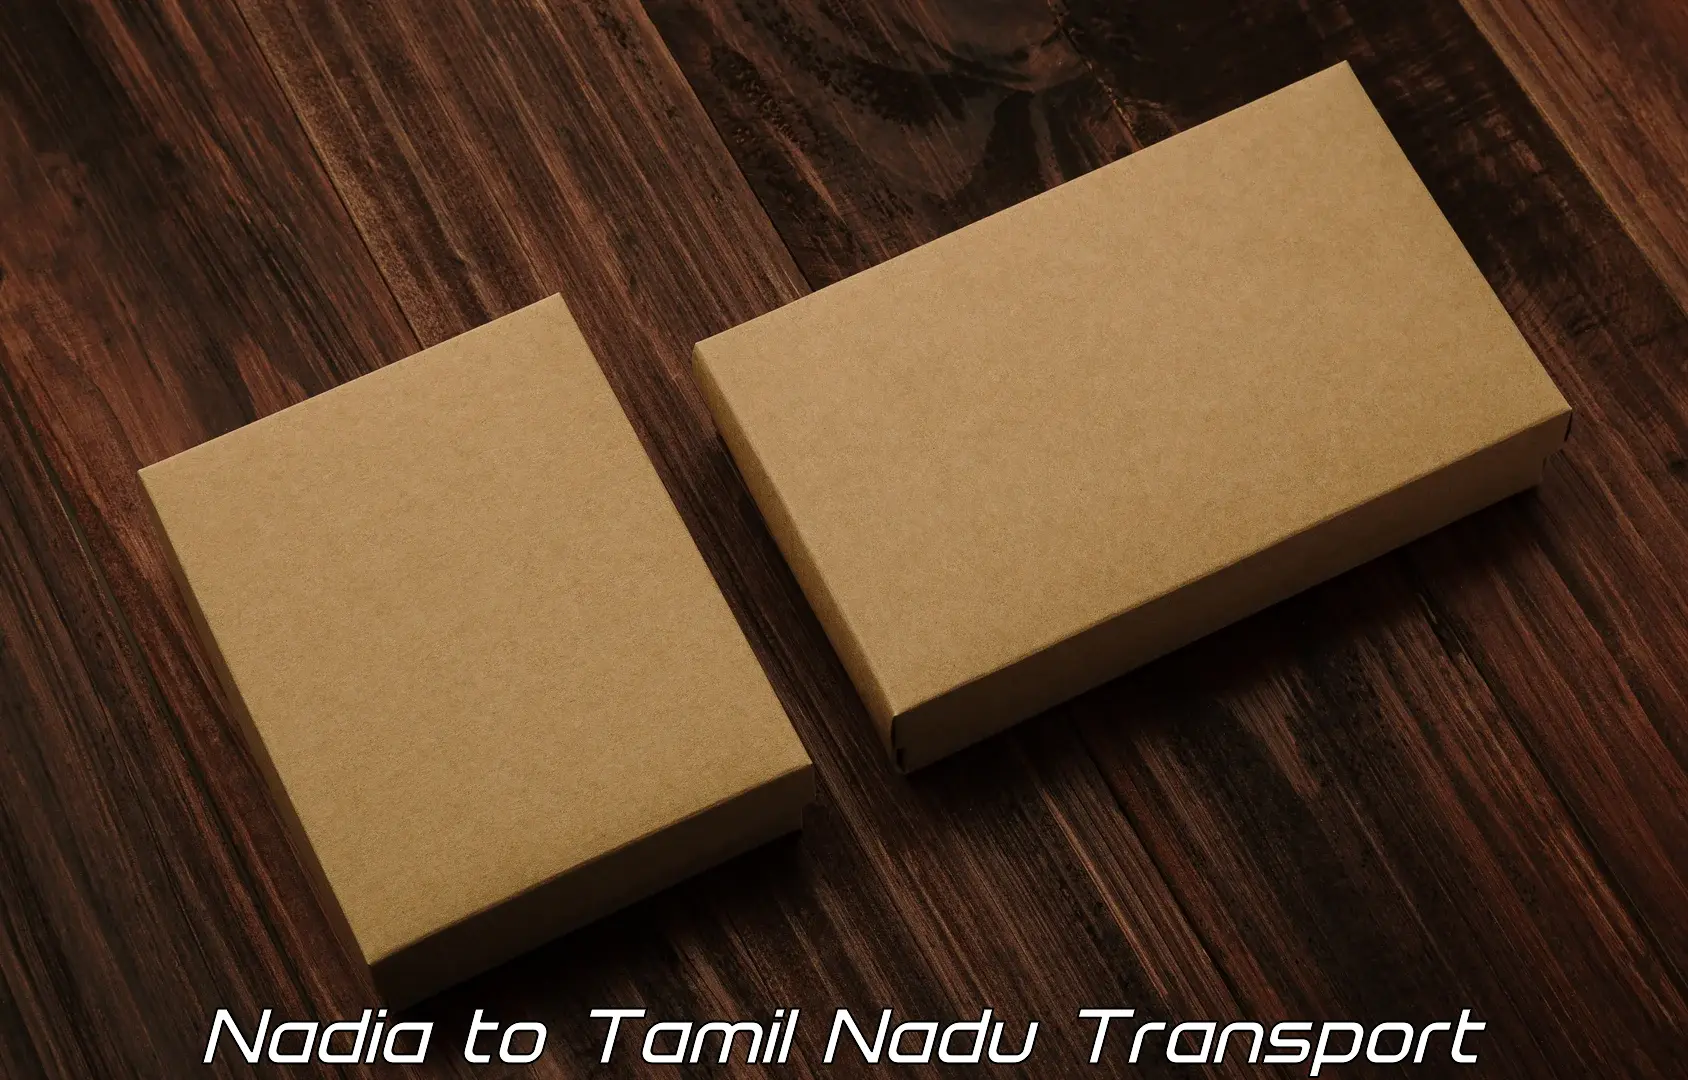 Truck transport companies in India Nadia to Salem